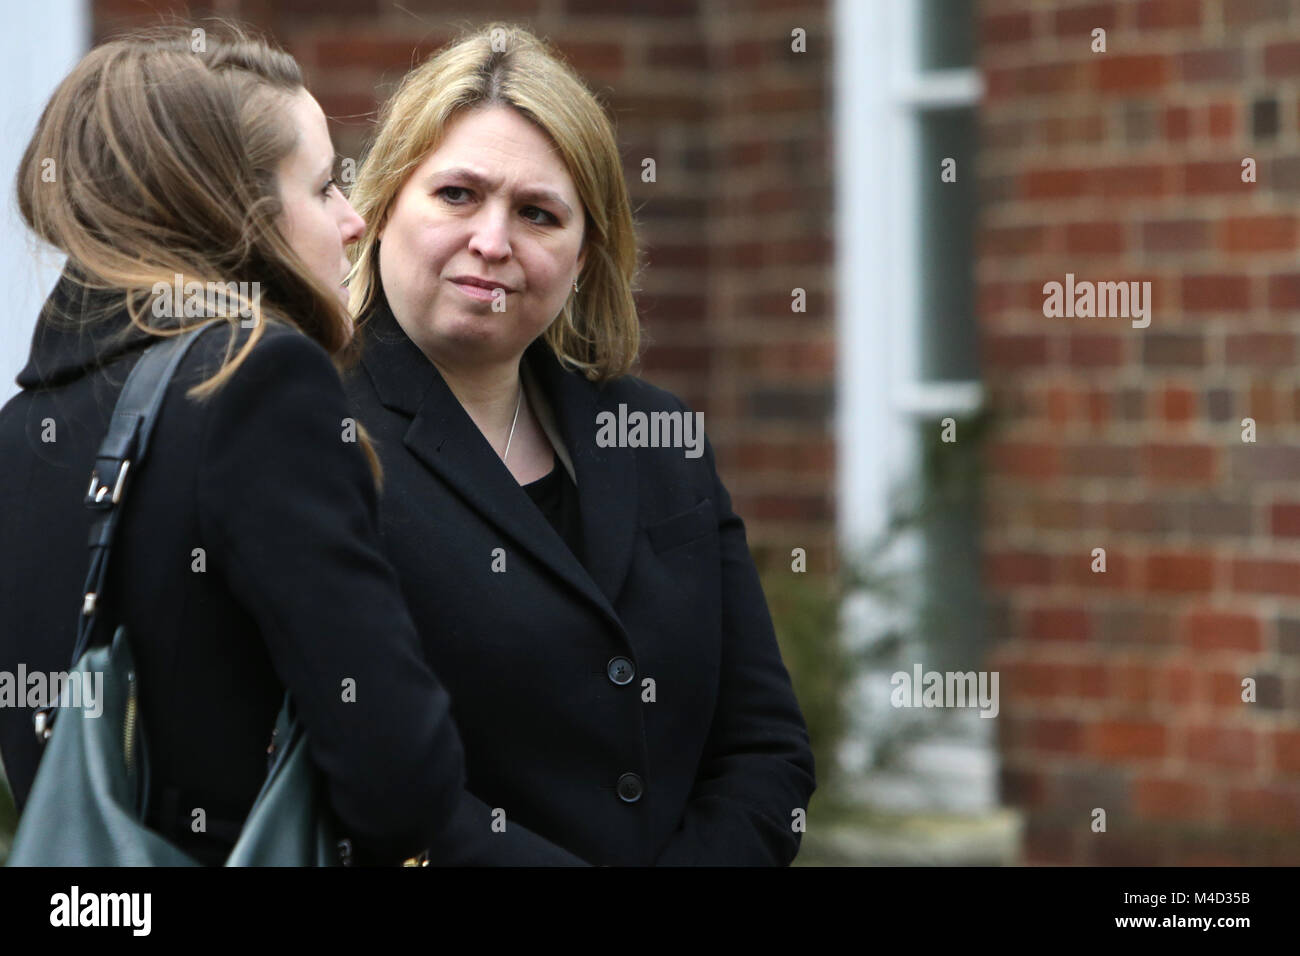 Northern Ireland Secretary of State Karen Bradley greets the British Prime Minister Theresa May at Stormont House,  Belfast, Monday, Feb 12th, 2018. Britain's Prime Minister Theresa May and Irish Prime Minister Leo Varadkar are to visit Belfast later for talks with the Stormont parties. It comes amid speculation the DUP and Sinn Féin are close to agreeing a deal to restore devolved government. Stock Photo